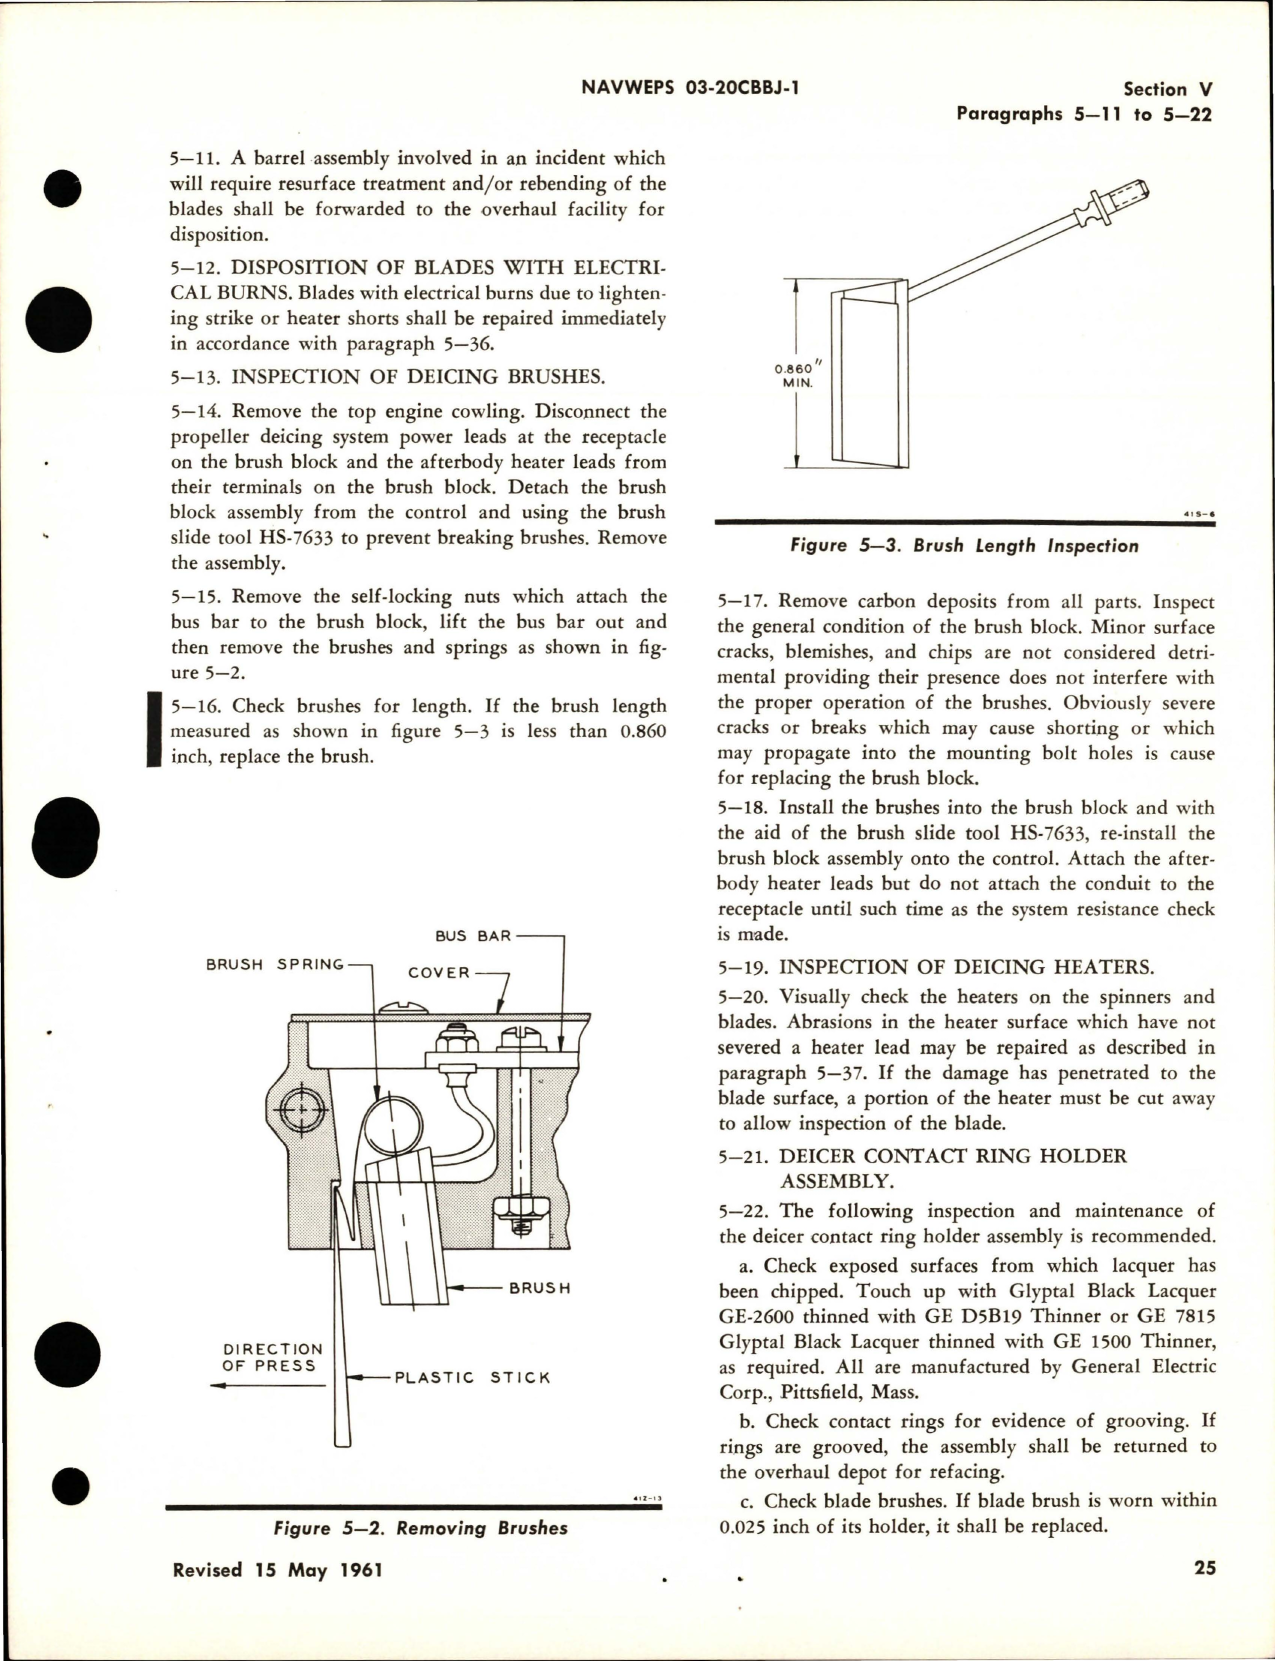 Sample page 9 from AirCorps Library document: Operation and Maintenance Instructions for Variable Pitch Propeller - Models 54H60-69, 54H60-75, and 54H60-73